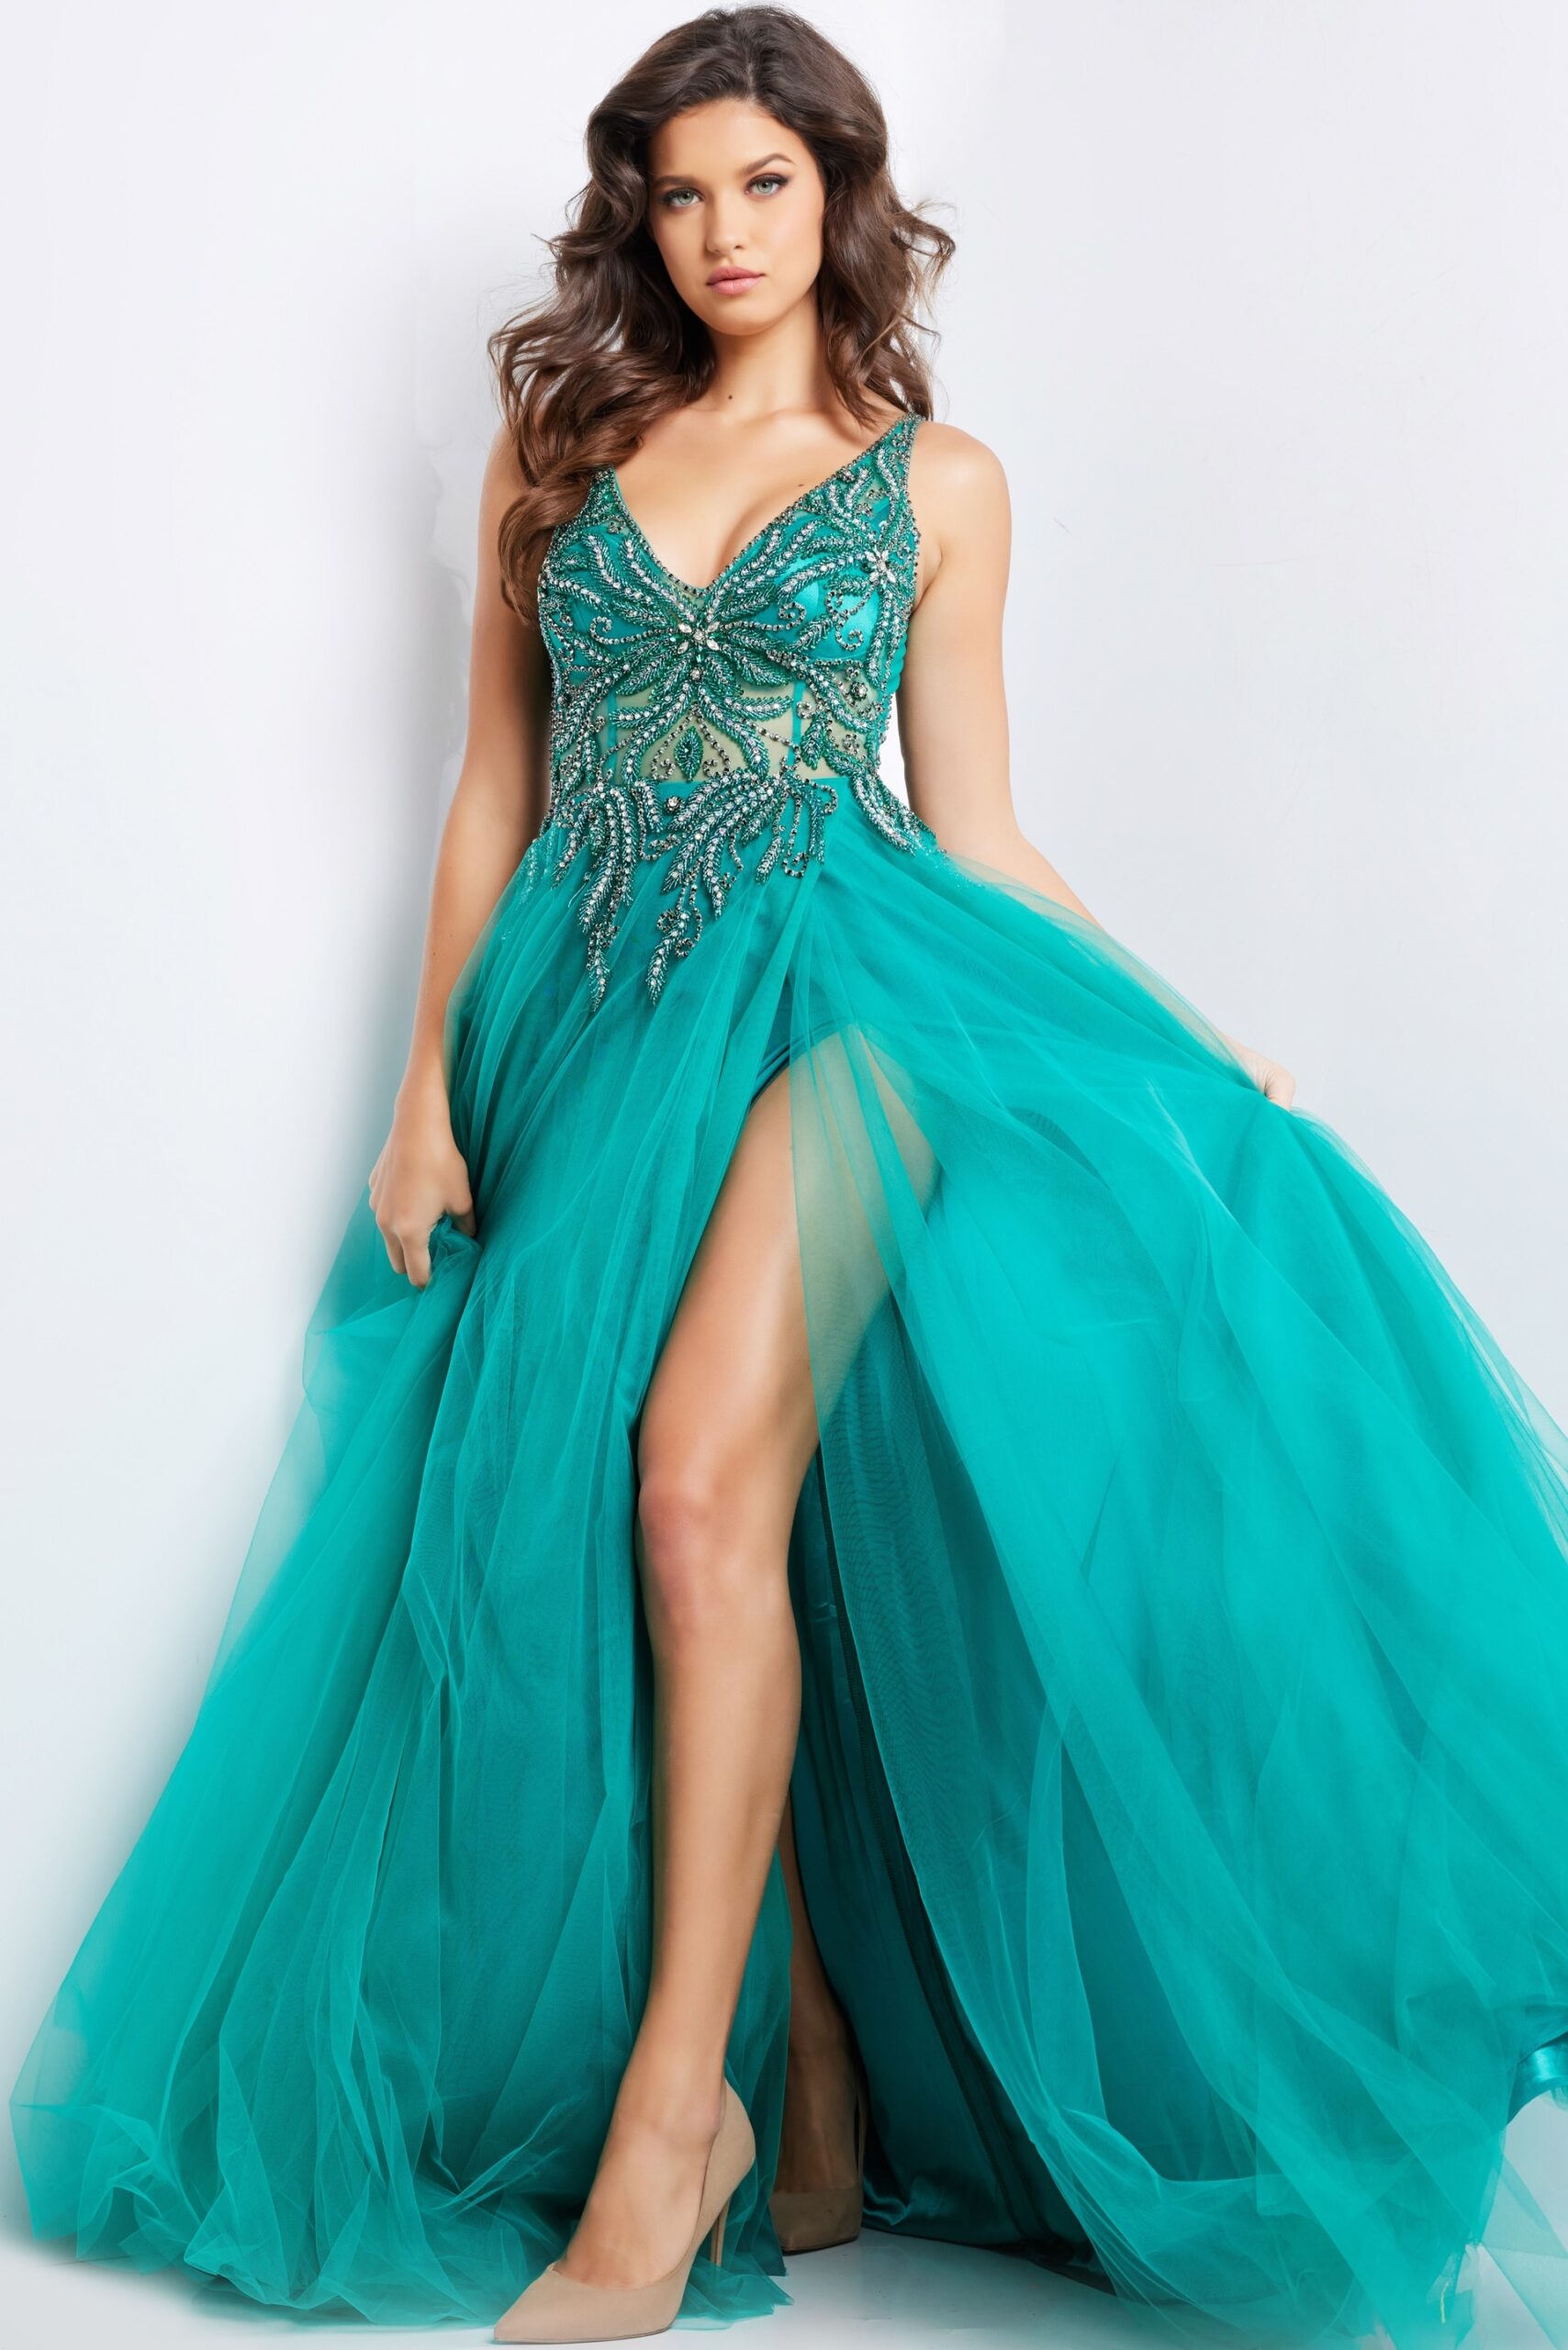 Emerald Embellished Bodice A line Gown 23962